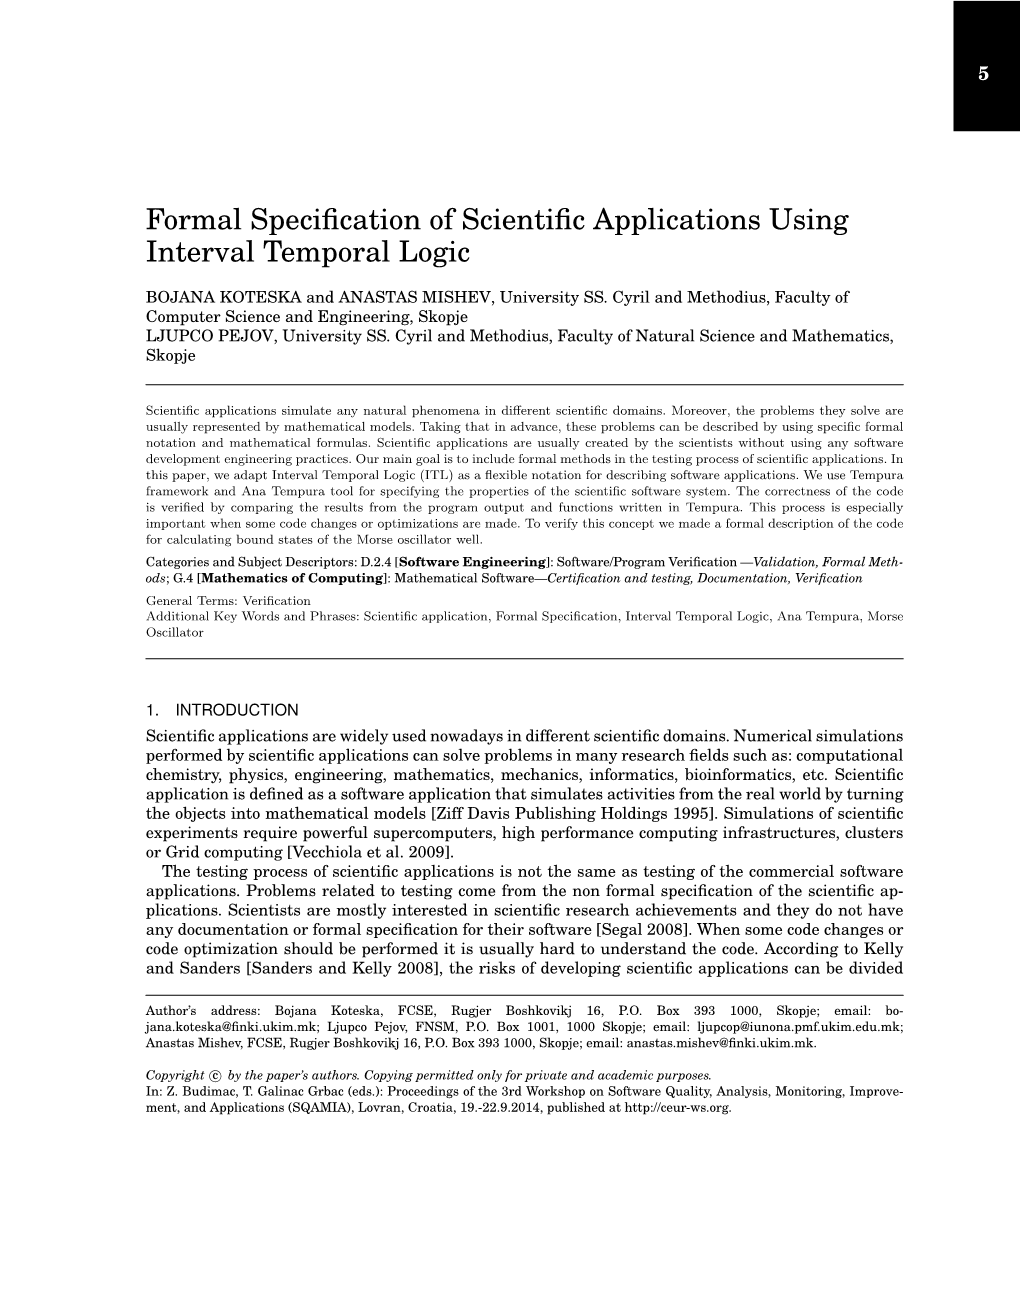 Formal Specification of Scientific Applications Using Interval